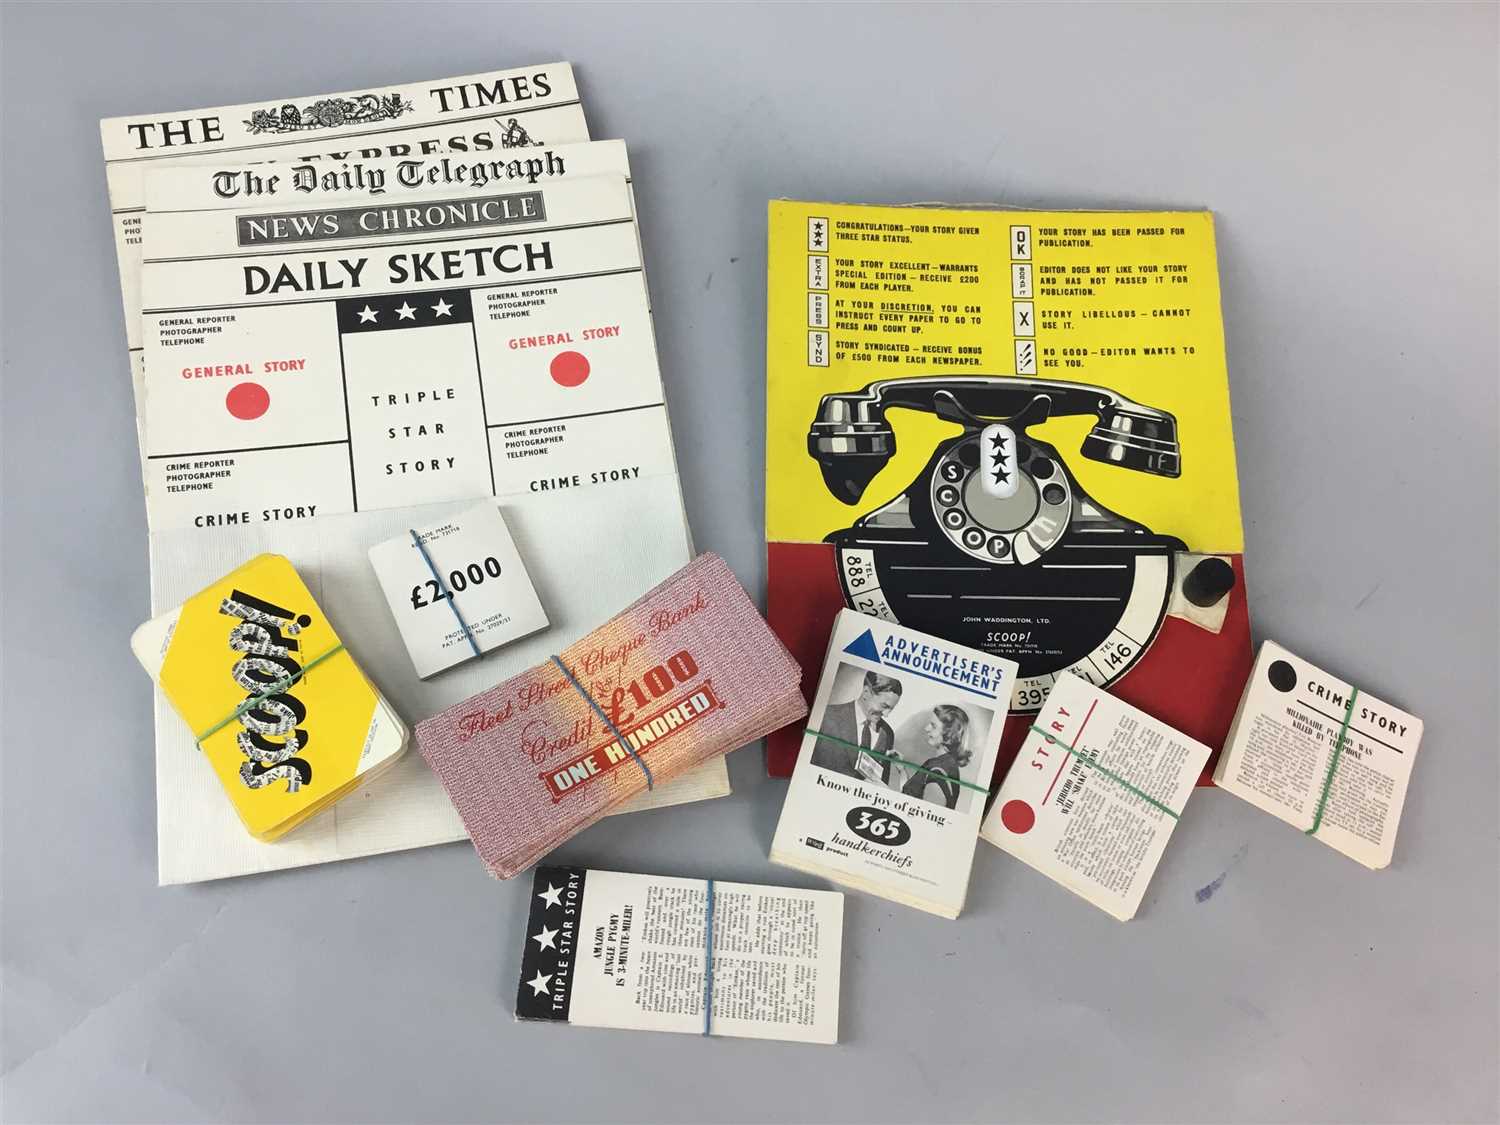 Lot 204 - A VINTAGE 'SCOOP!' GAME AND CARDS